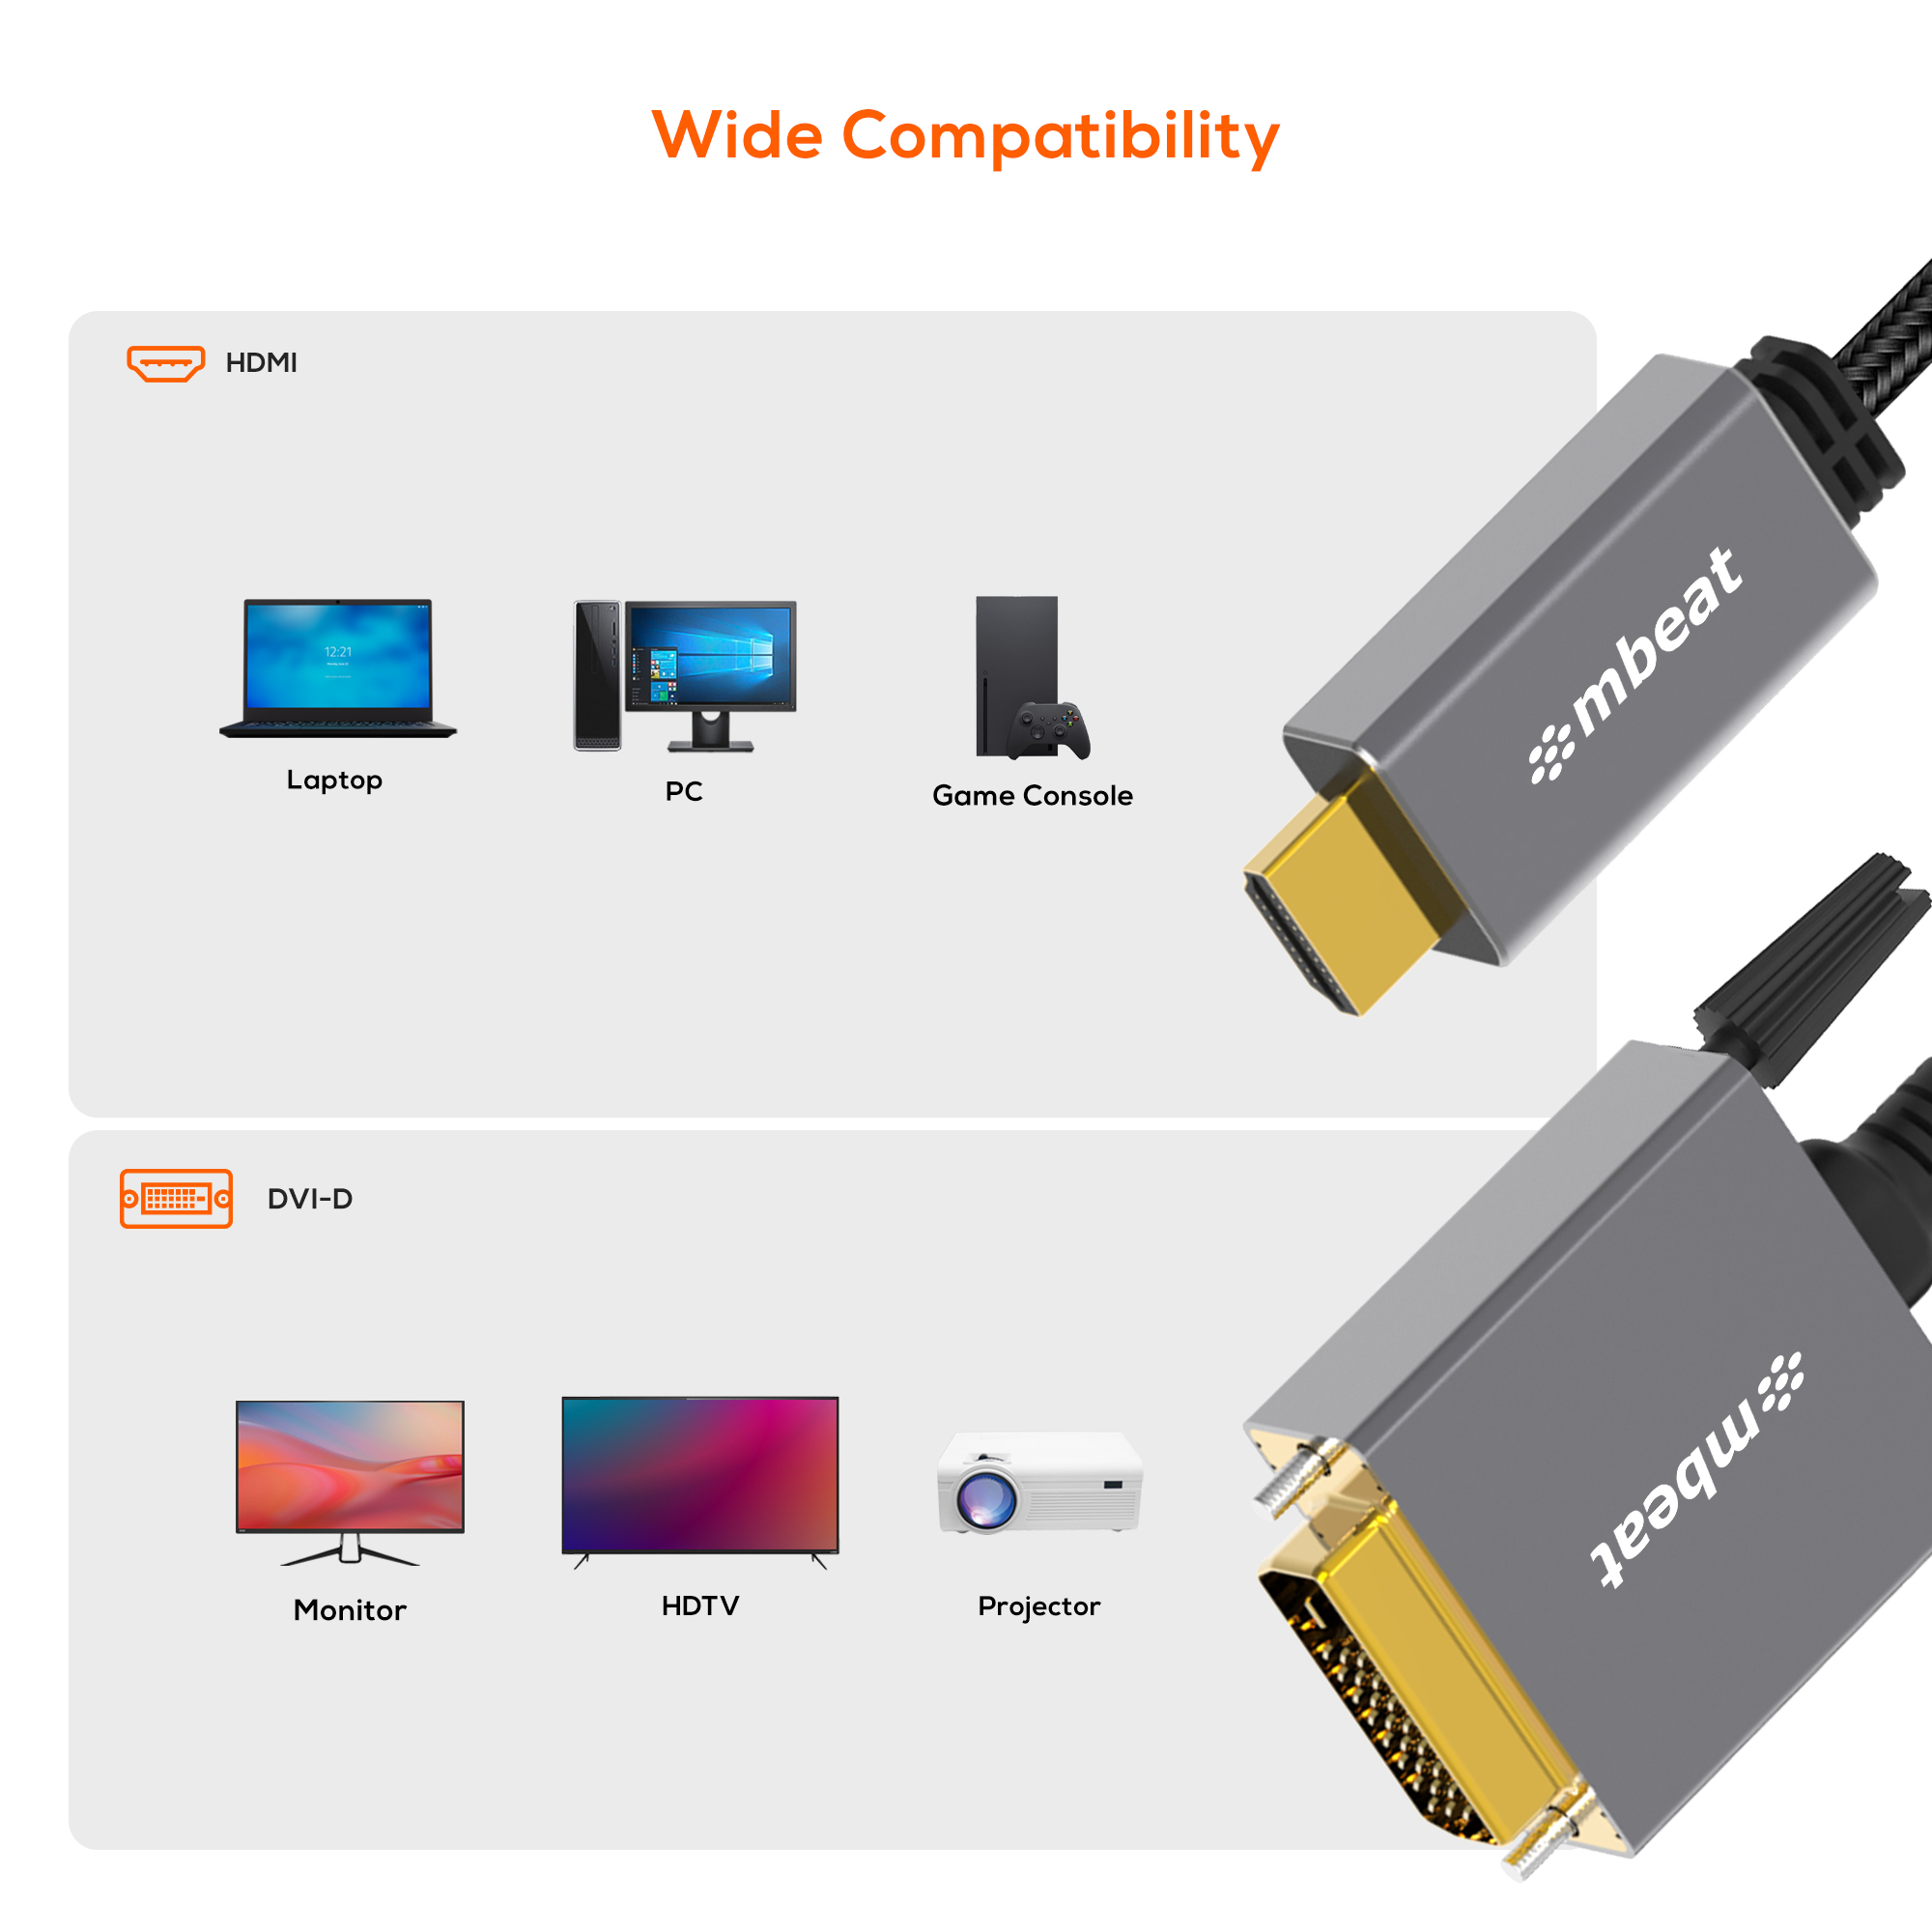 A large marketing image providing additional information about the product mbeat Tough Link HDMI to DVI Cable - 1.8m - Additional alt info not provided